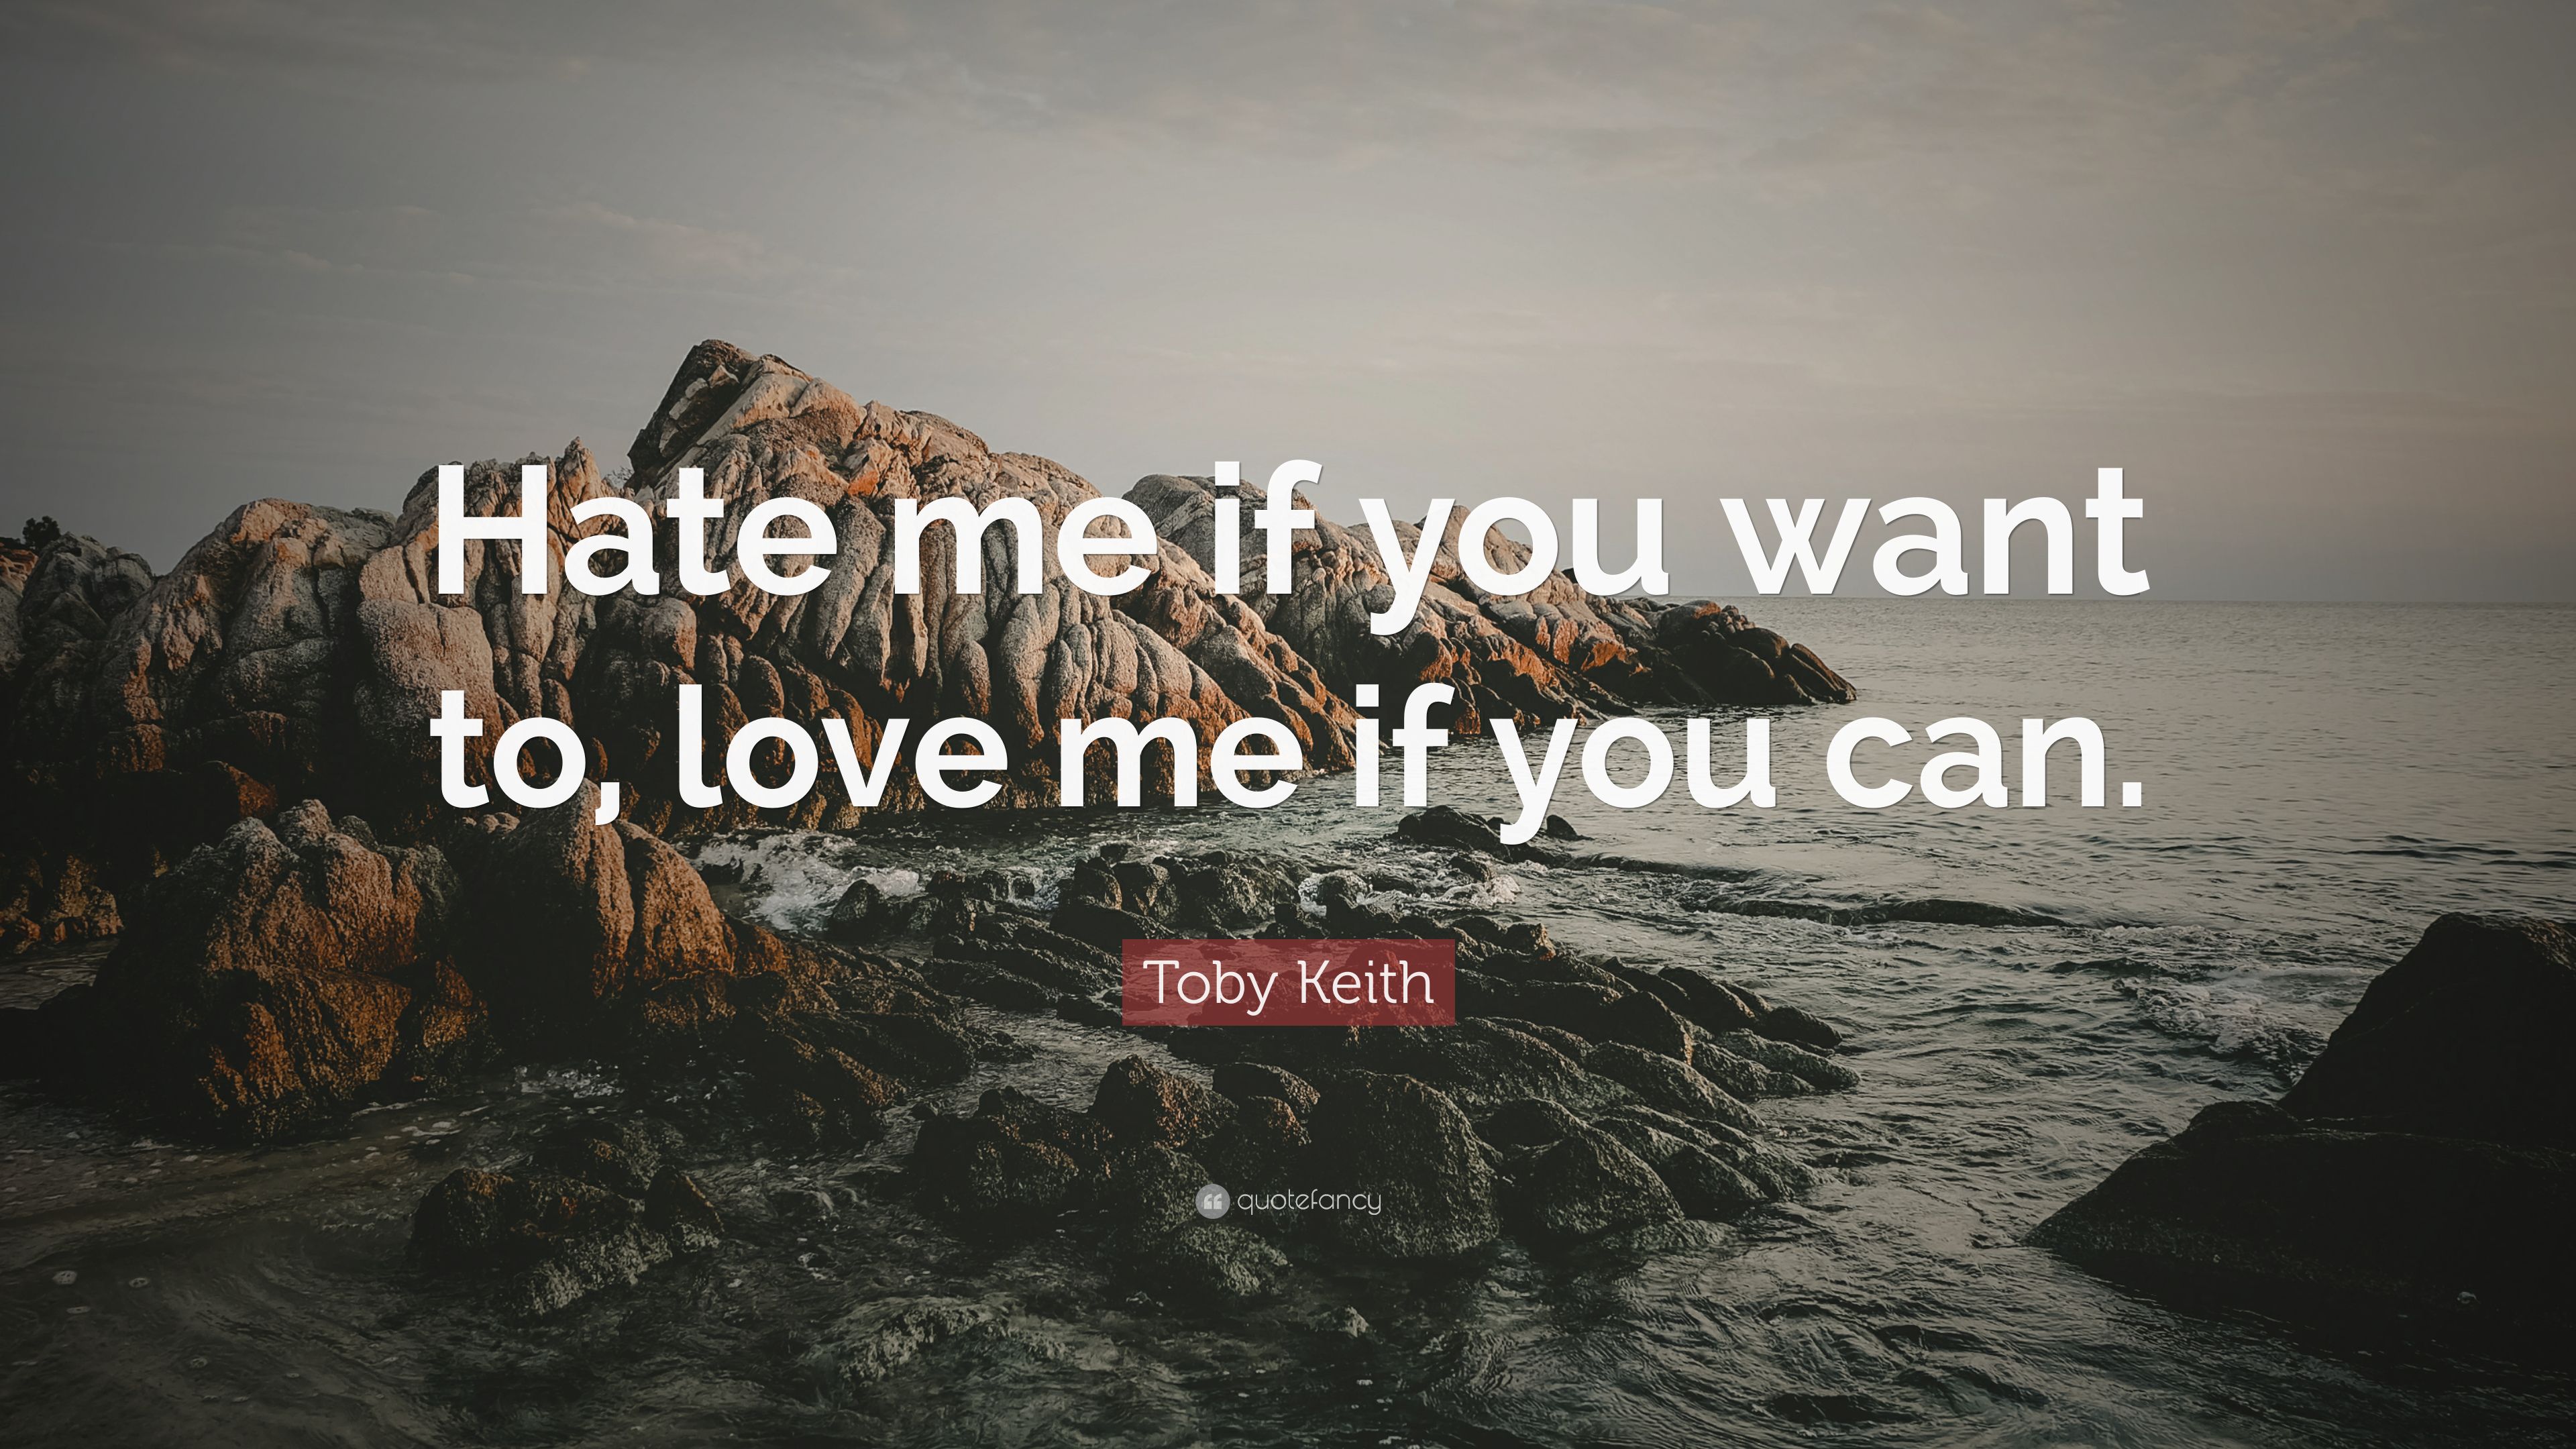 Toby Keith Quote: “Hate me if you want to, love me if you can.” 7